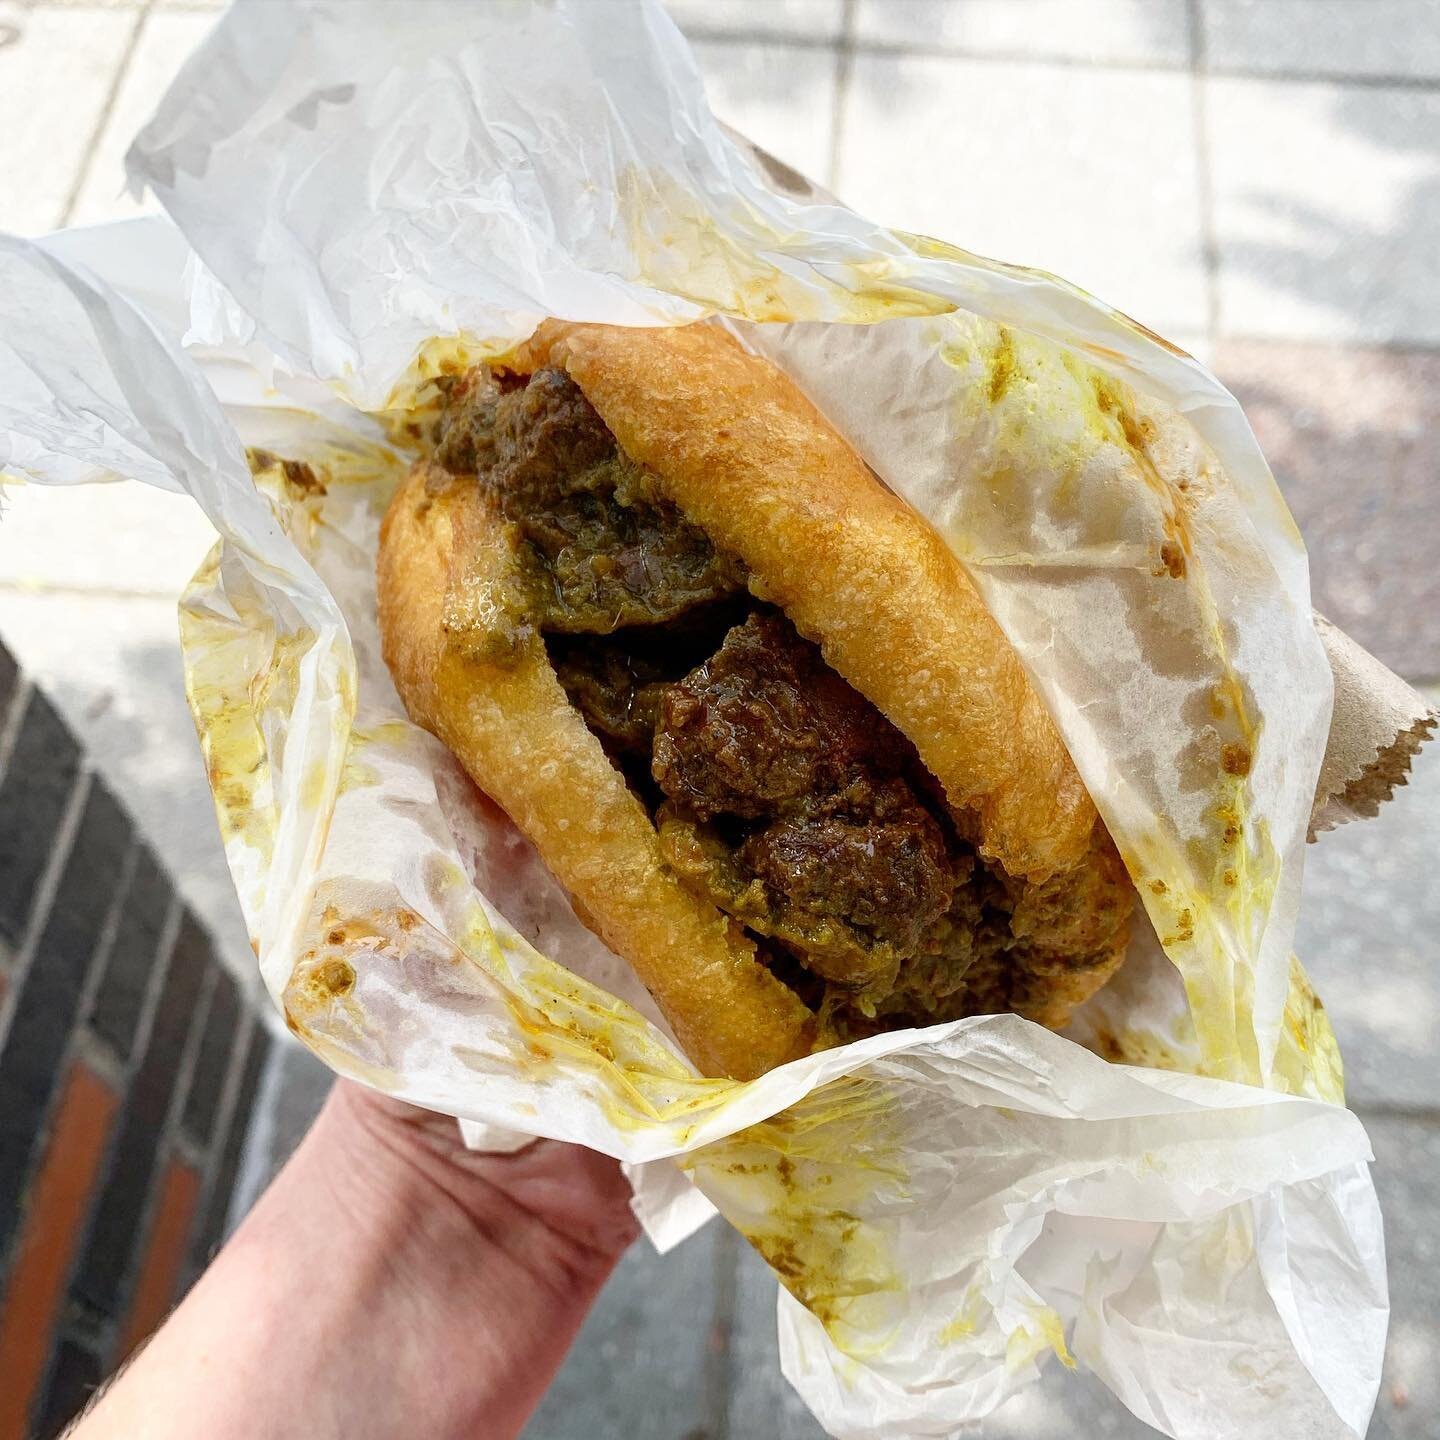 The best breakfast meeting with @kilolostrobert. We stomped around Brooklyn and ate doubles and THIS fry bake with liver and gizzards from A&amp;A.